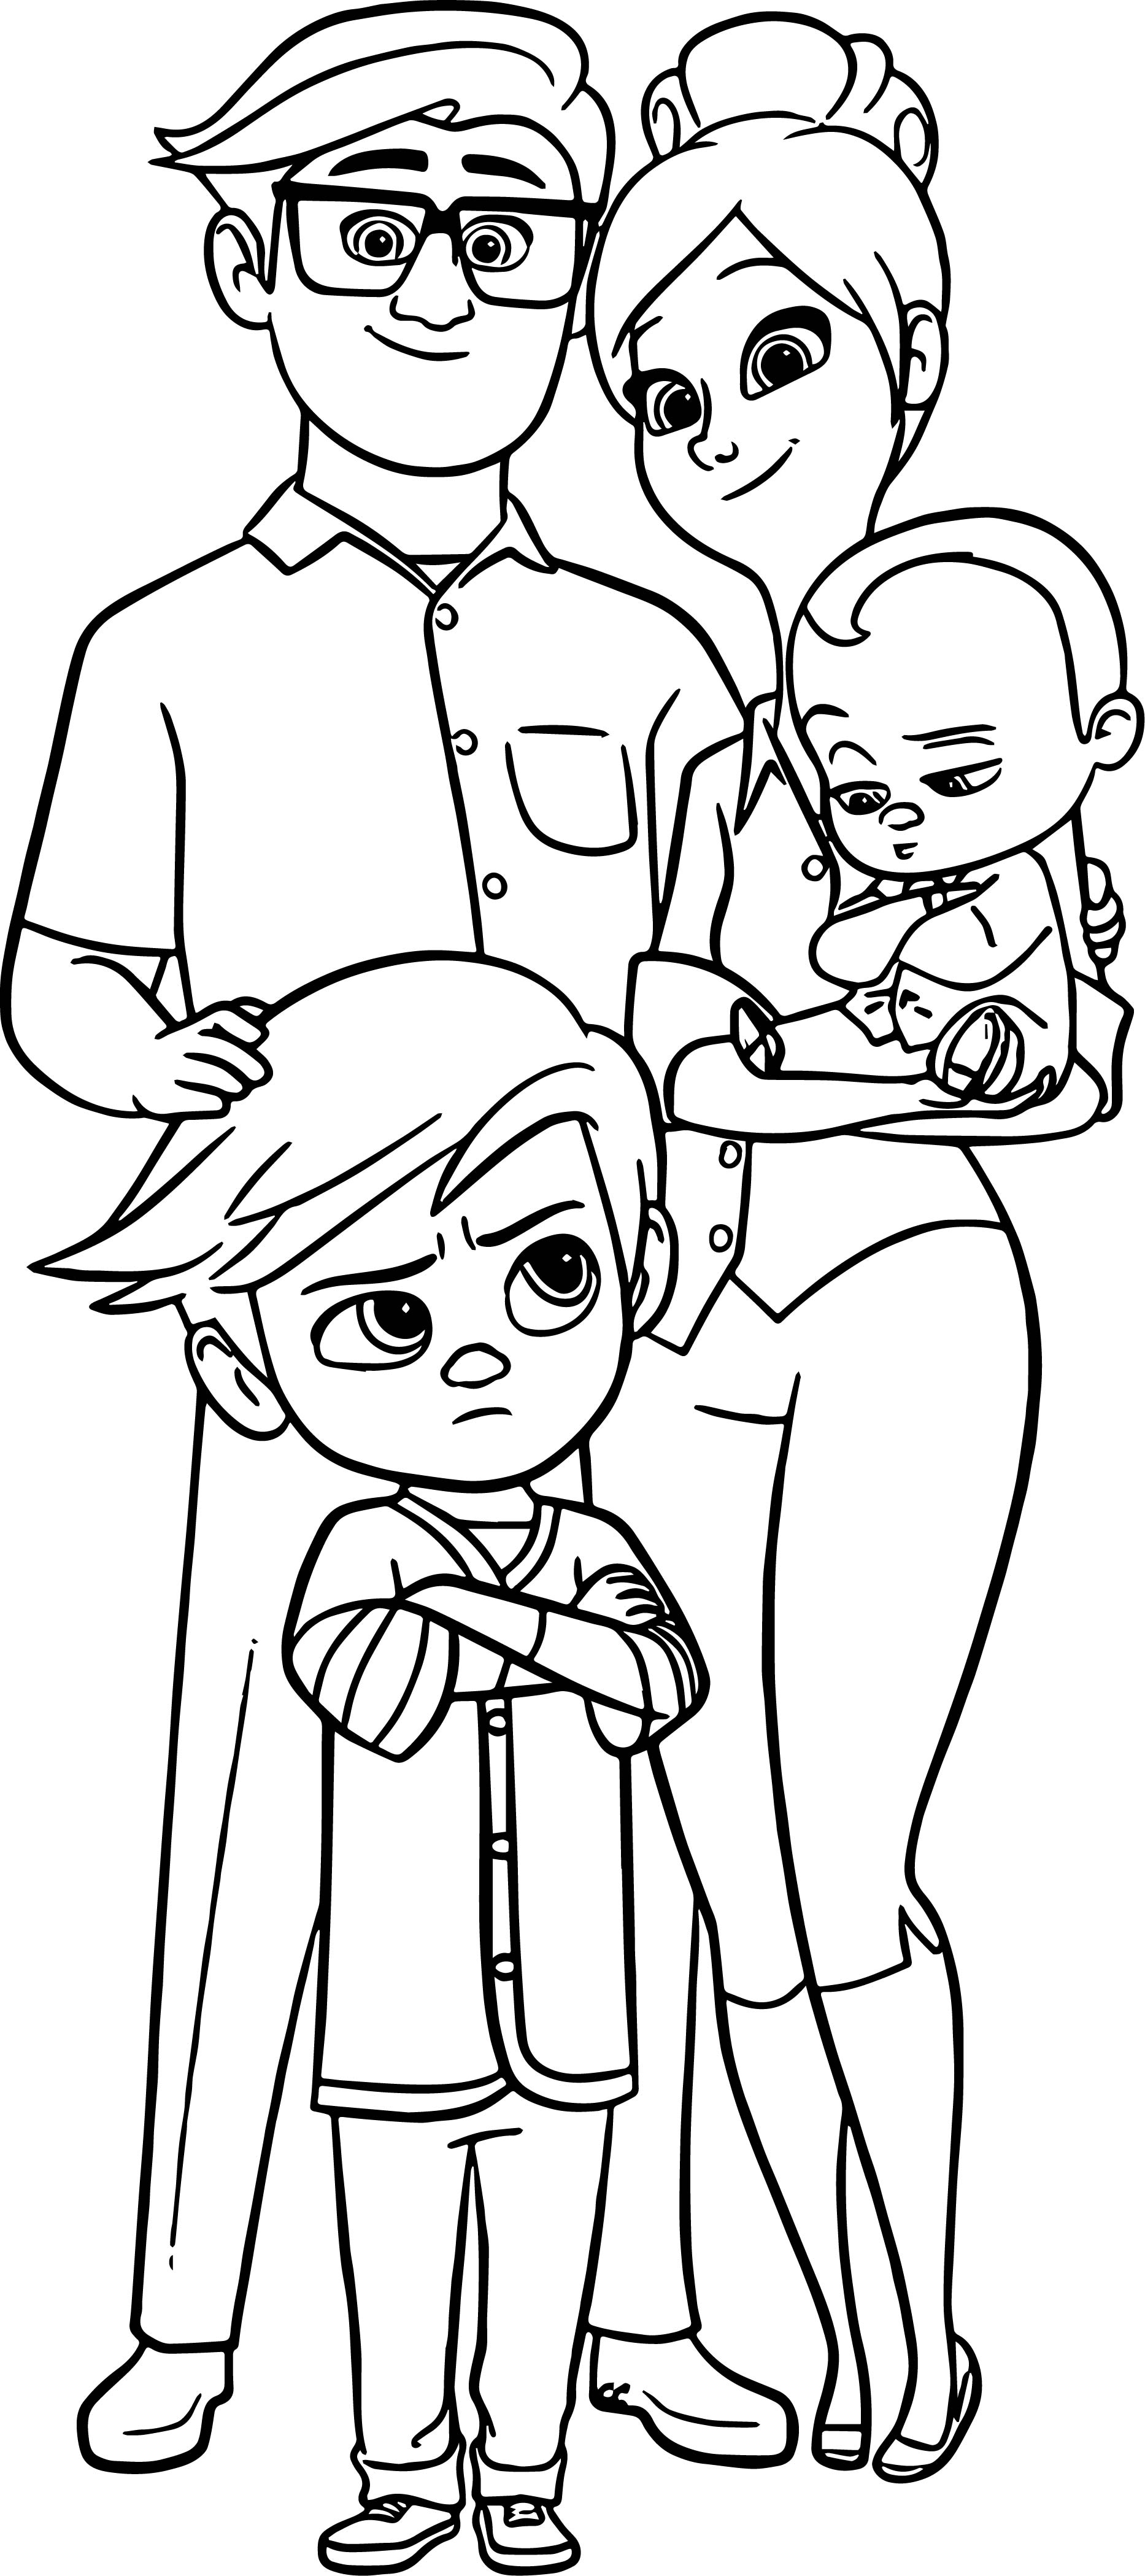 Cartoon Family Coloring Pages At Getcolorings.com | Free Printable